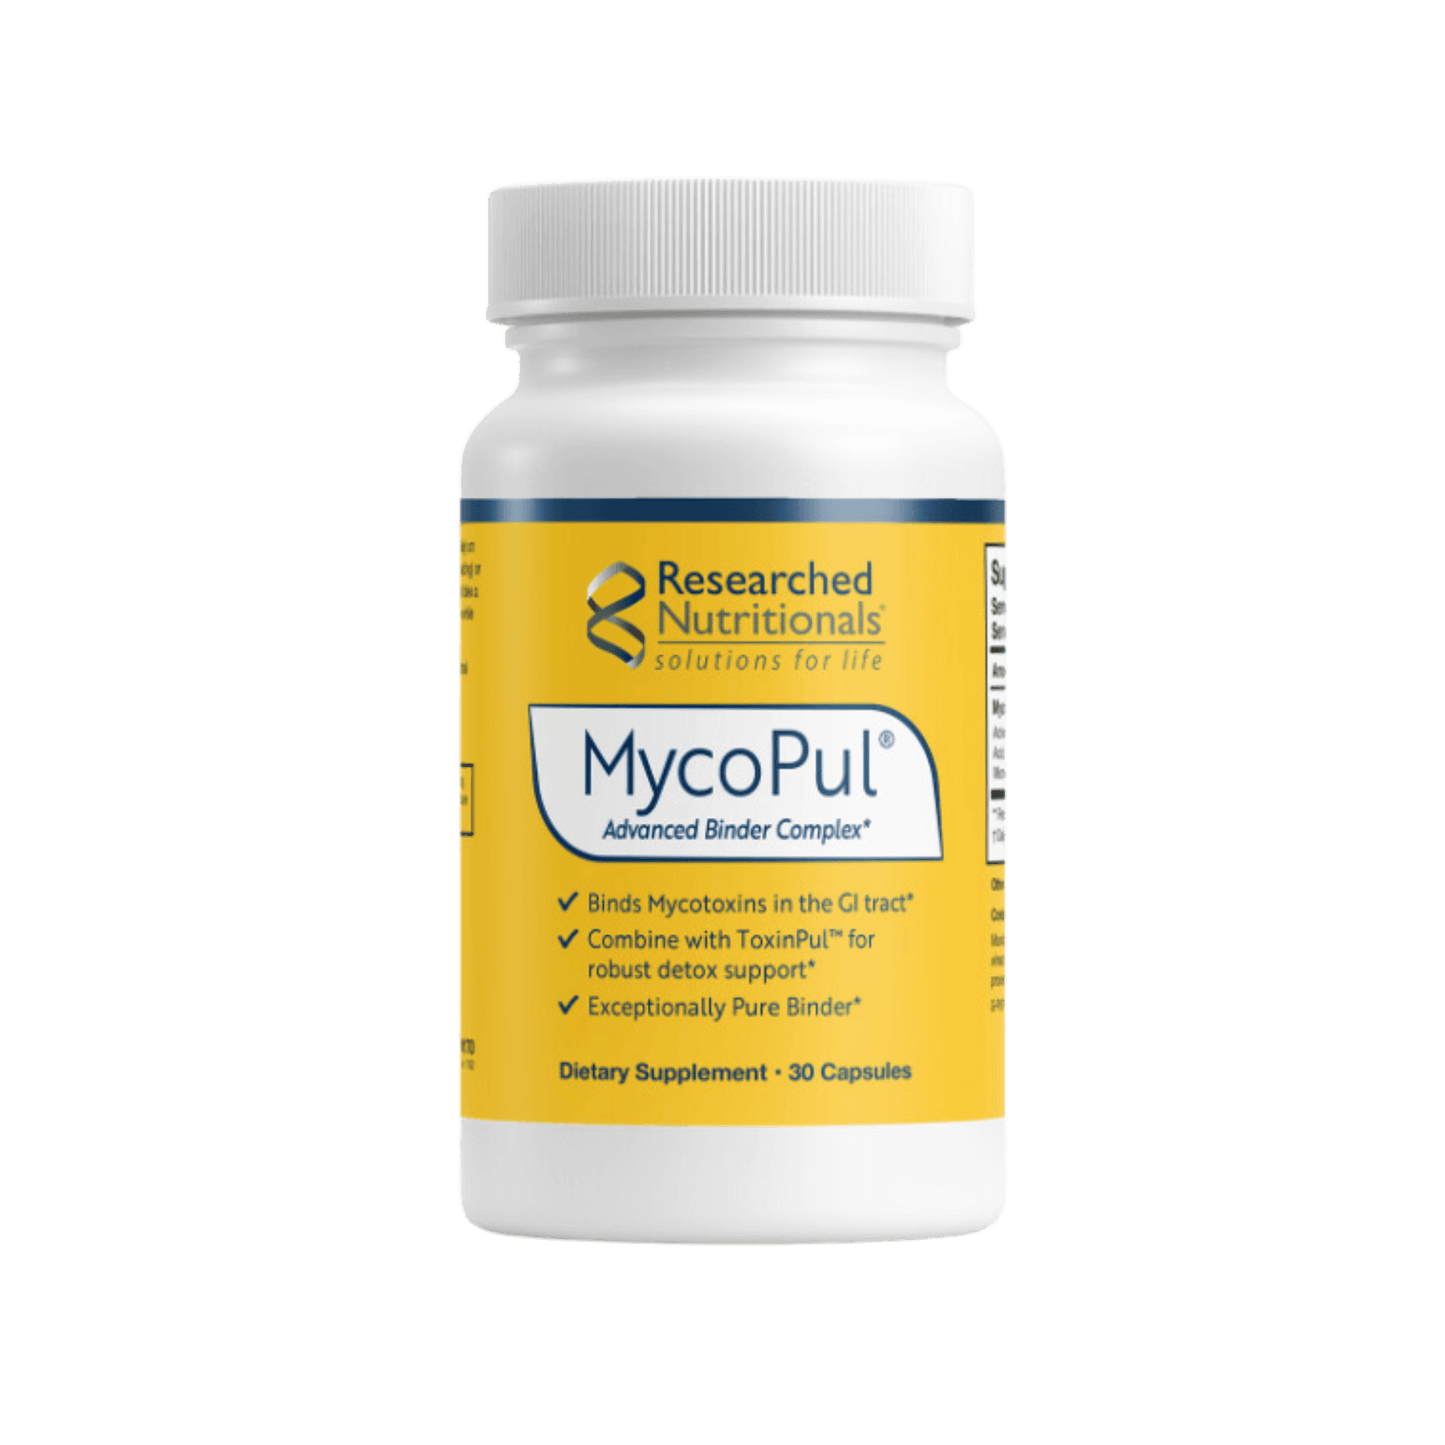 Researched Nutritionals MycoPul Binder Capsules